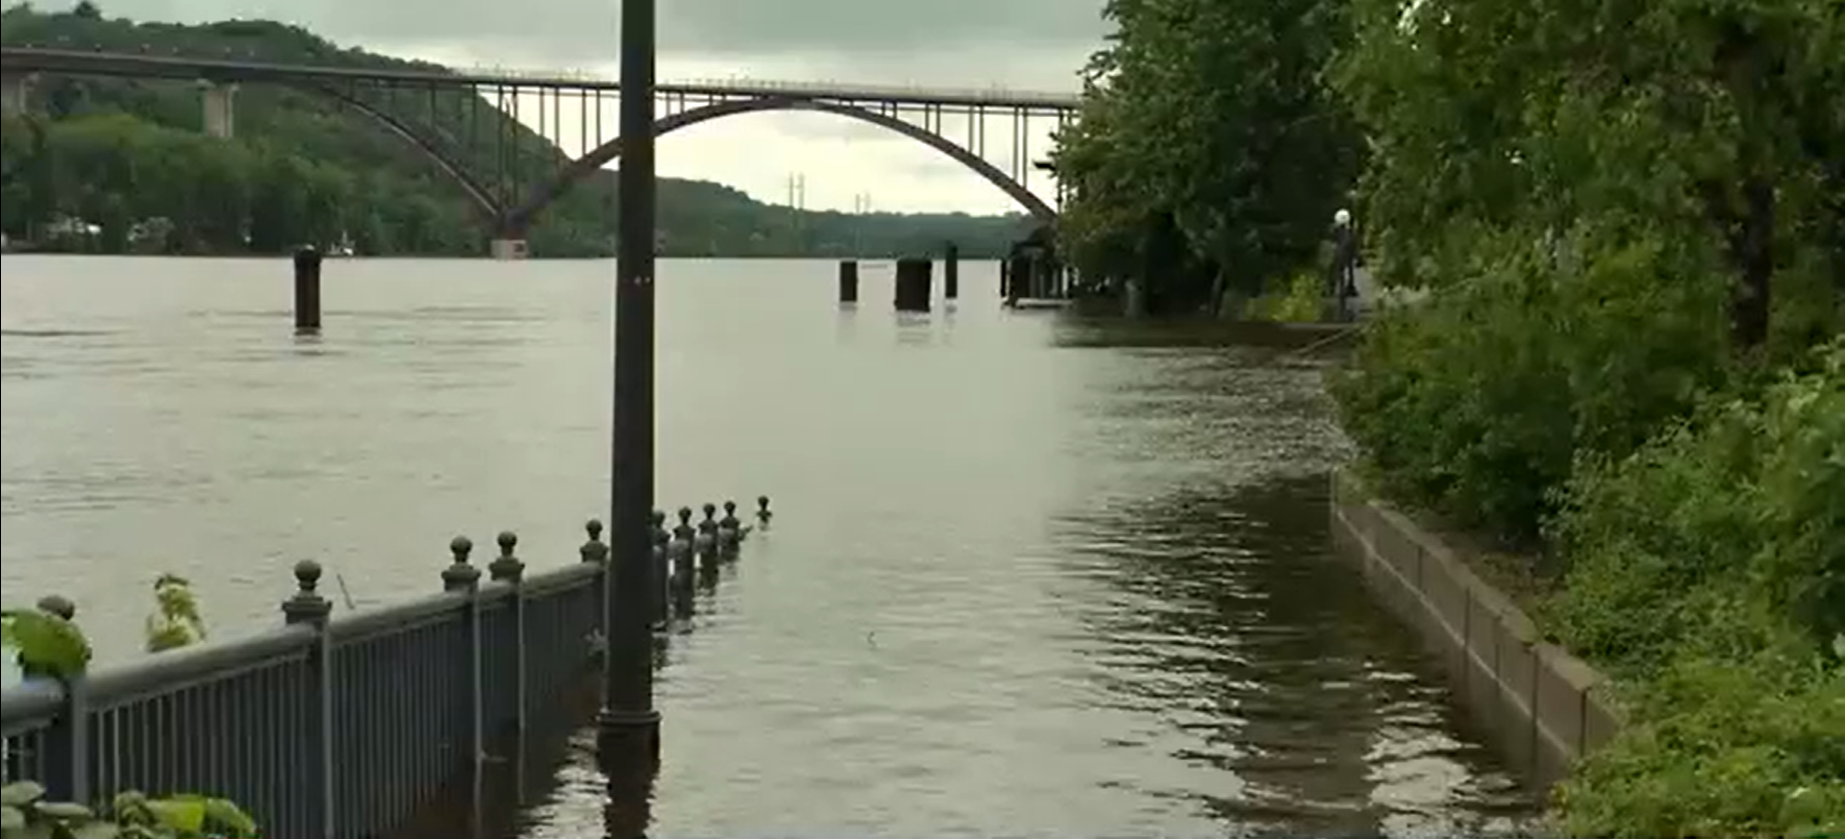 As Mississippi levels rise, so do concerns by river users